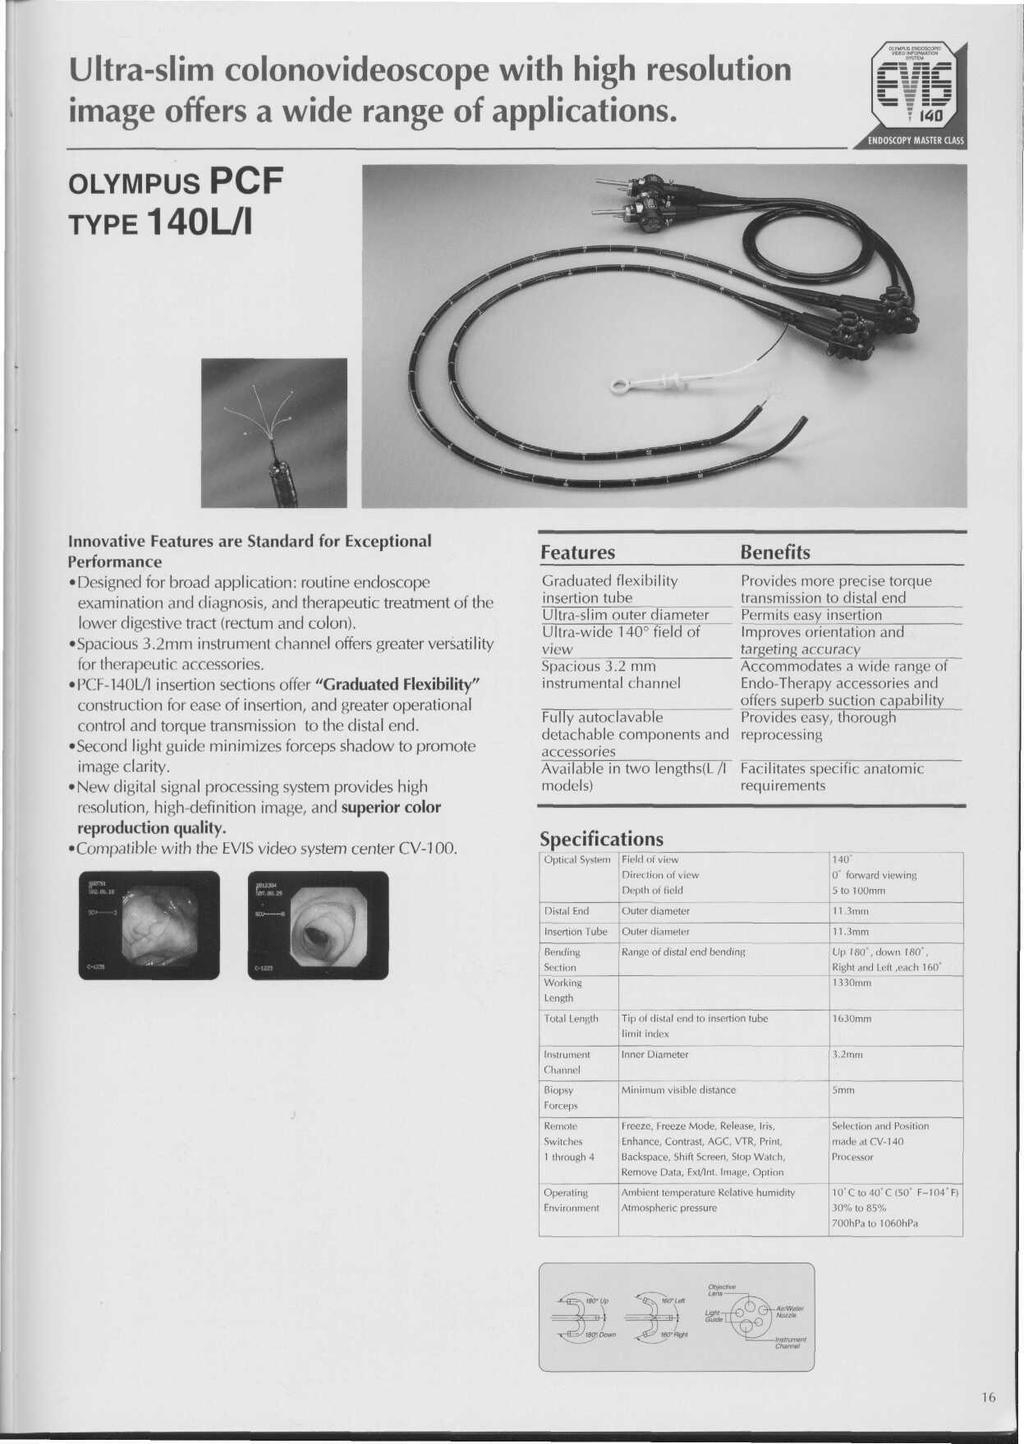 Ultraslim colonovideoscope with high resolution image offers a wide range of applications.